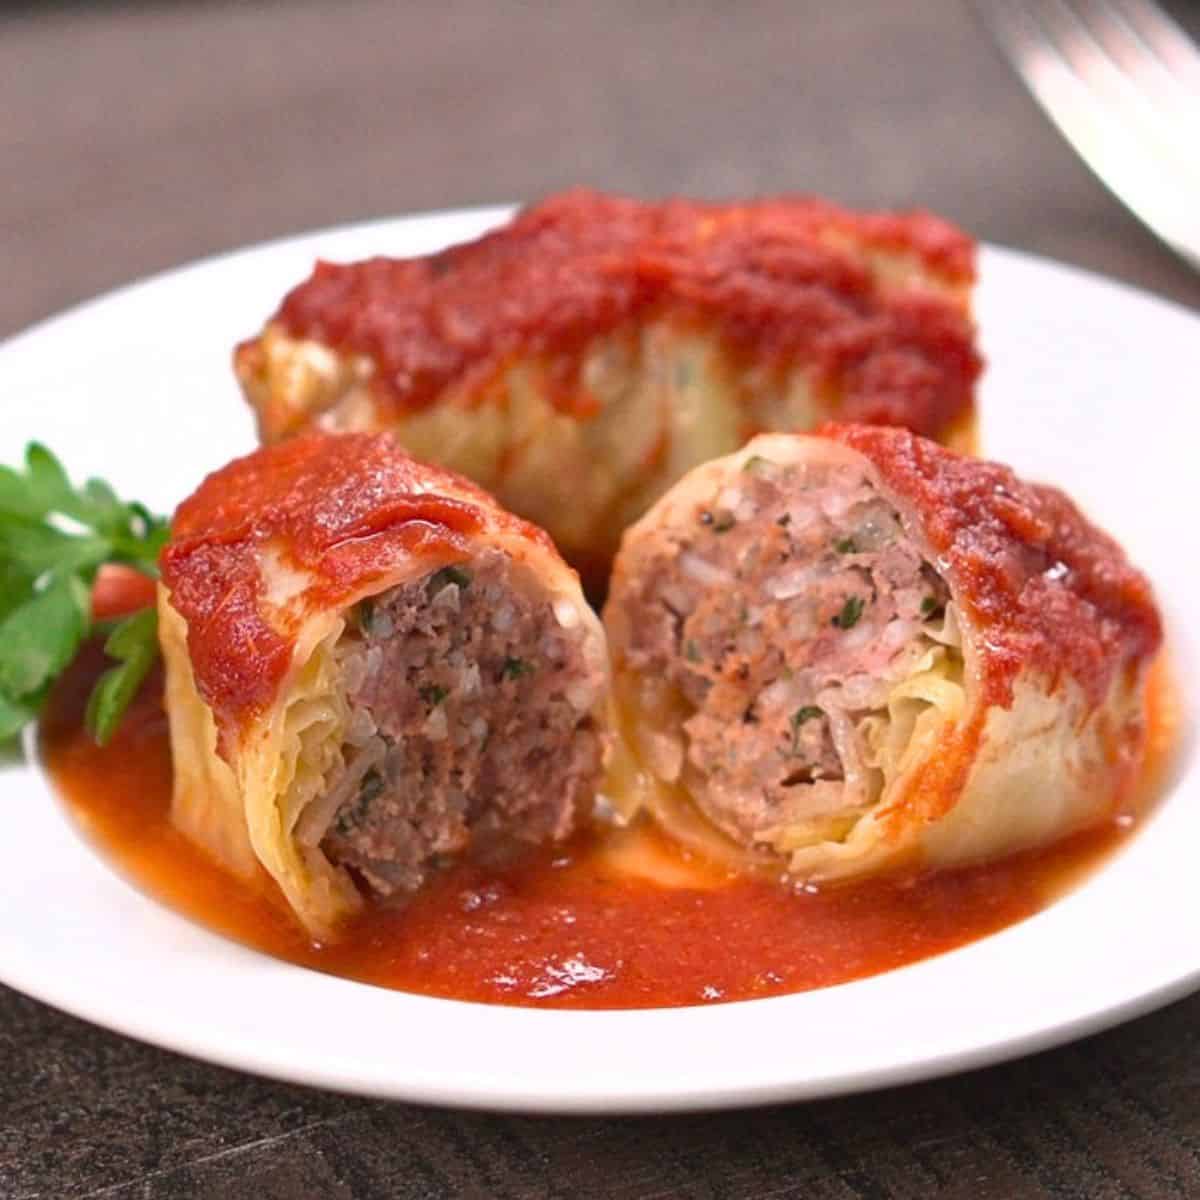 Two cabbage rolls on white plate. One cabbage is cut in half in foreground.